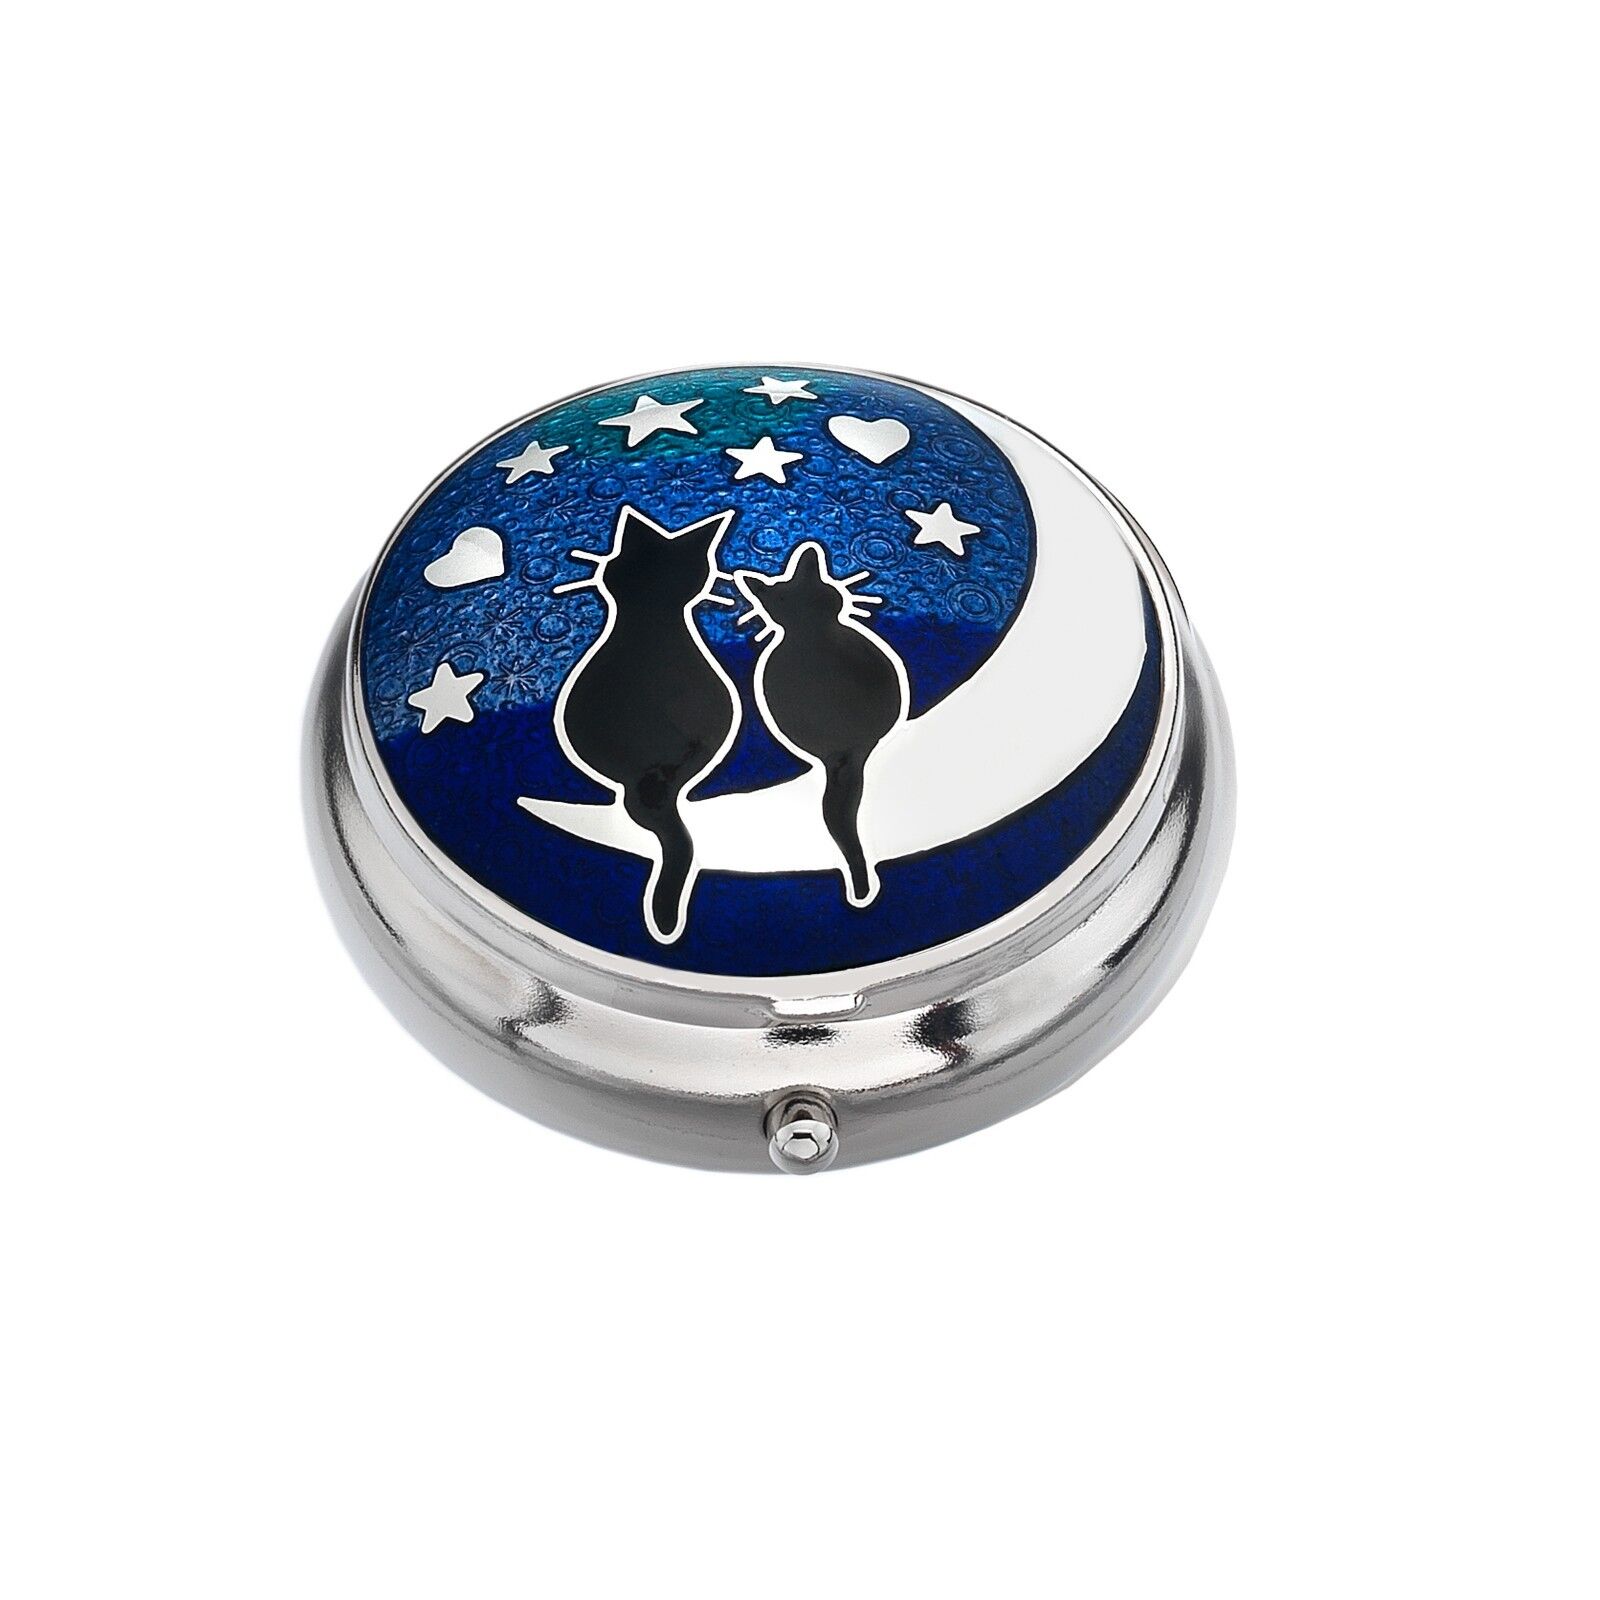 Pill Box Silver Plated Black Cat Cats on the Moon Design Brand New and Boxed